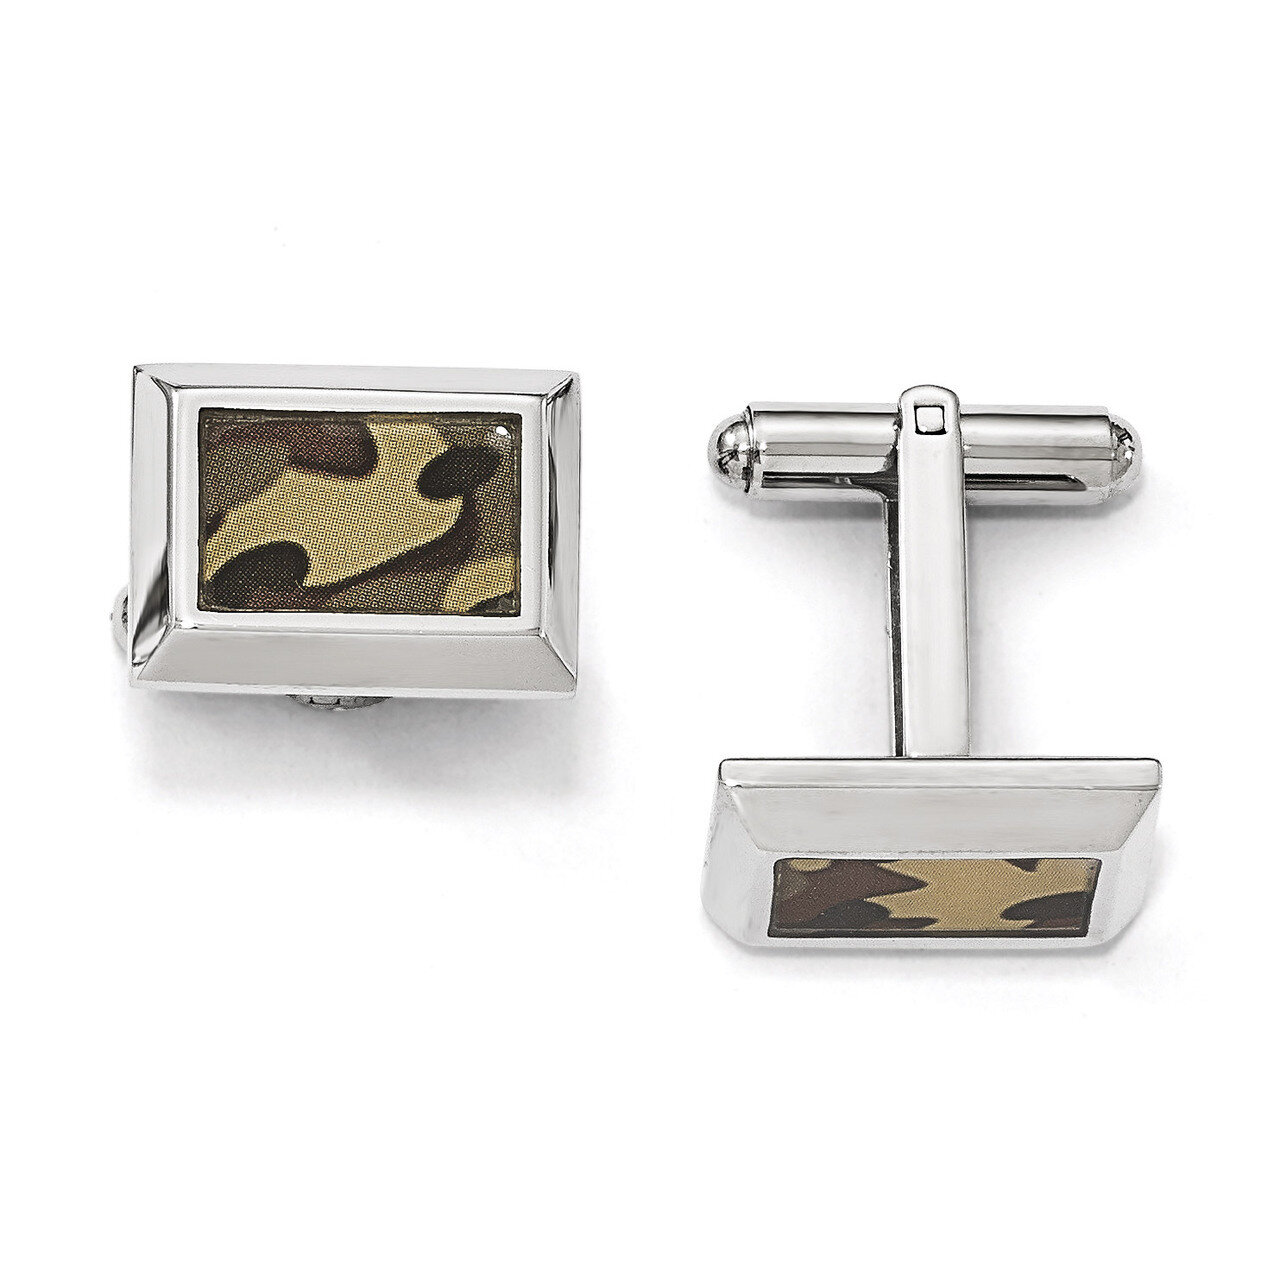 Polished Printed Brown Camo Under Rubber Cufflinks - Stainless Steel SRC297